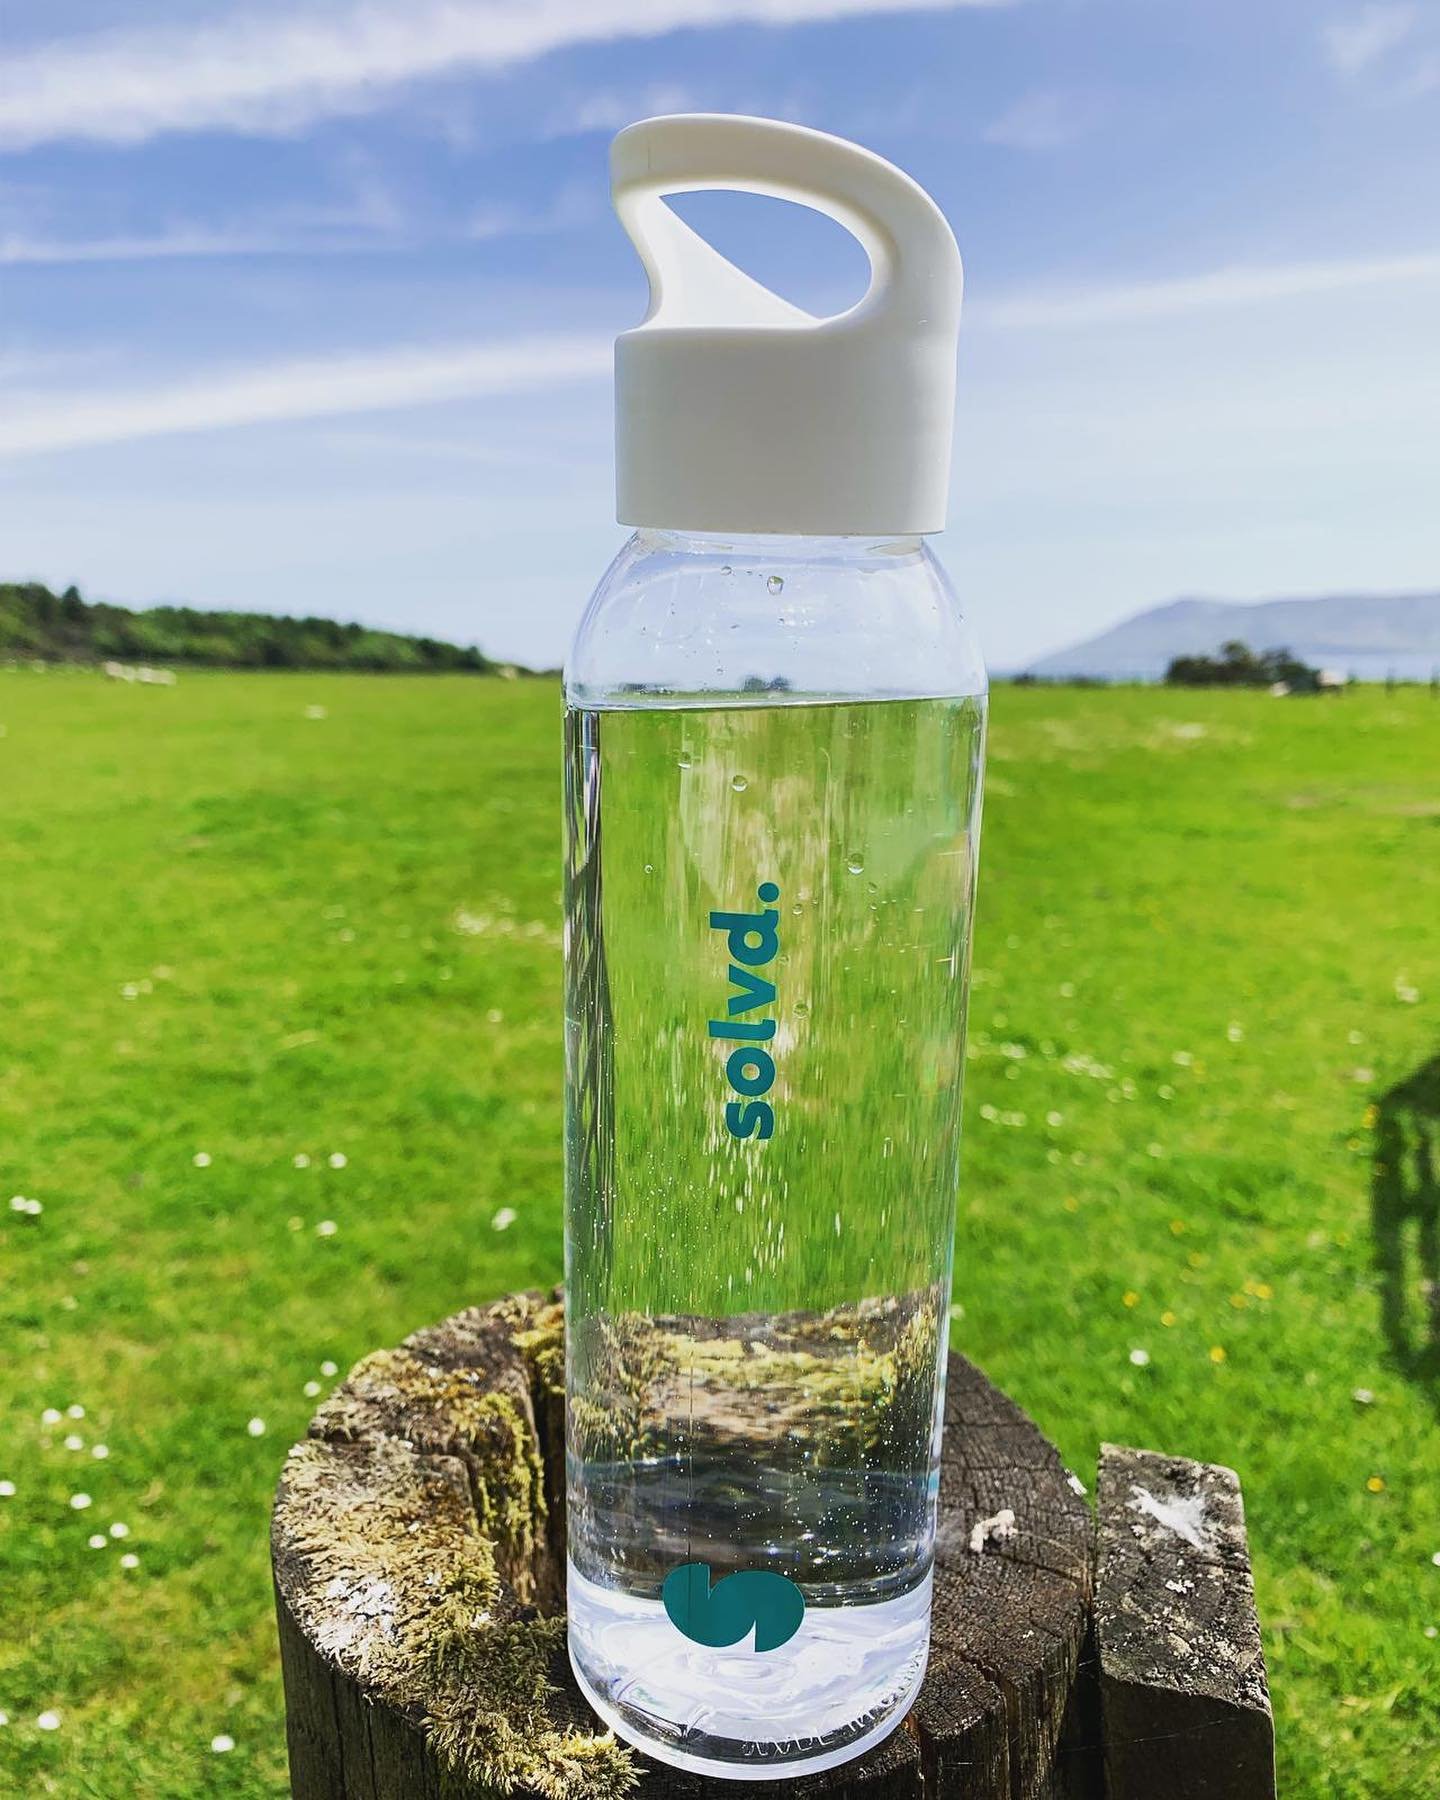 Happy Earth Day! 🌎🌱 

Here at Solvd. we want to celebrate this years theme of Planet vs. Plastics, which calls to help phase out all single use plastics. We encourage all our staff to use our reusable water bottles on site. 

Every refill counts to